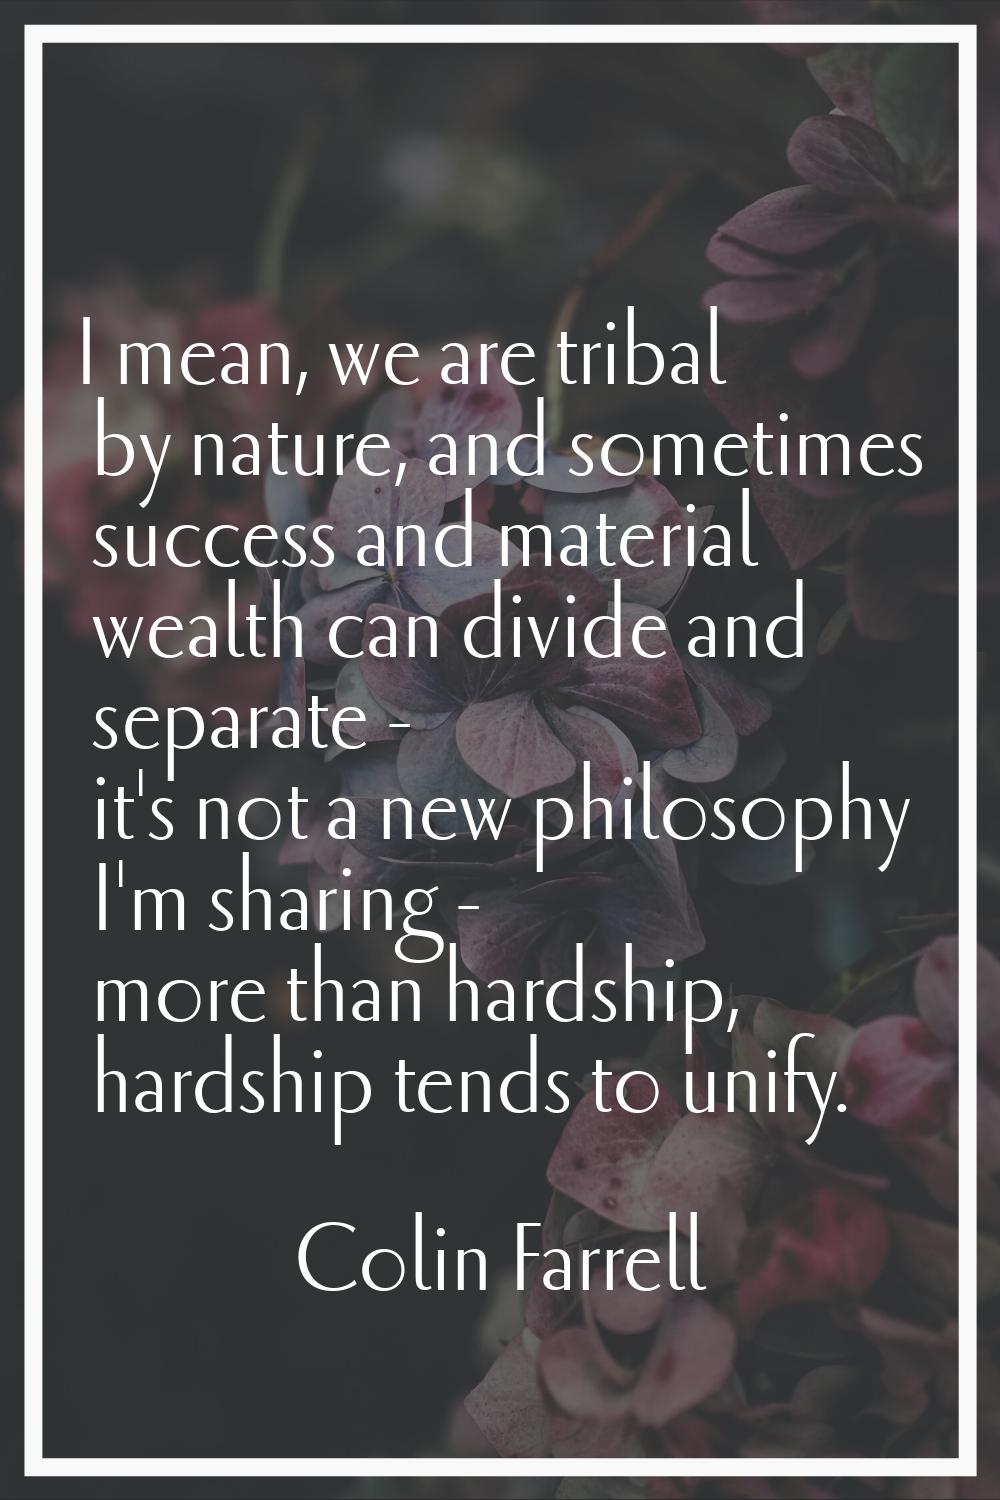 I mean, we are tribal by nature, and sometimes success and material wealth can divide and separate 